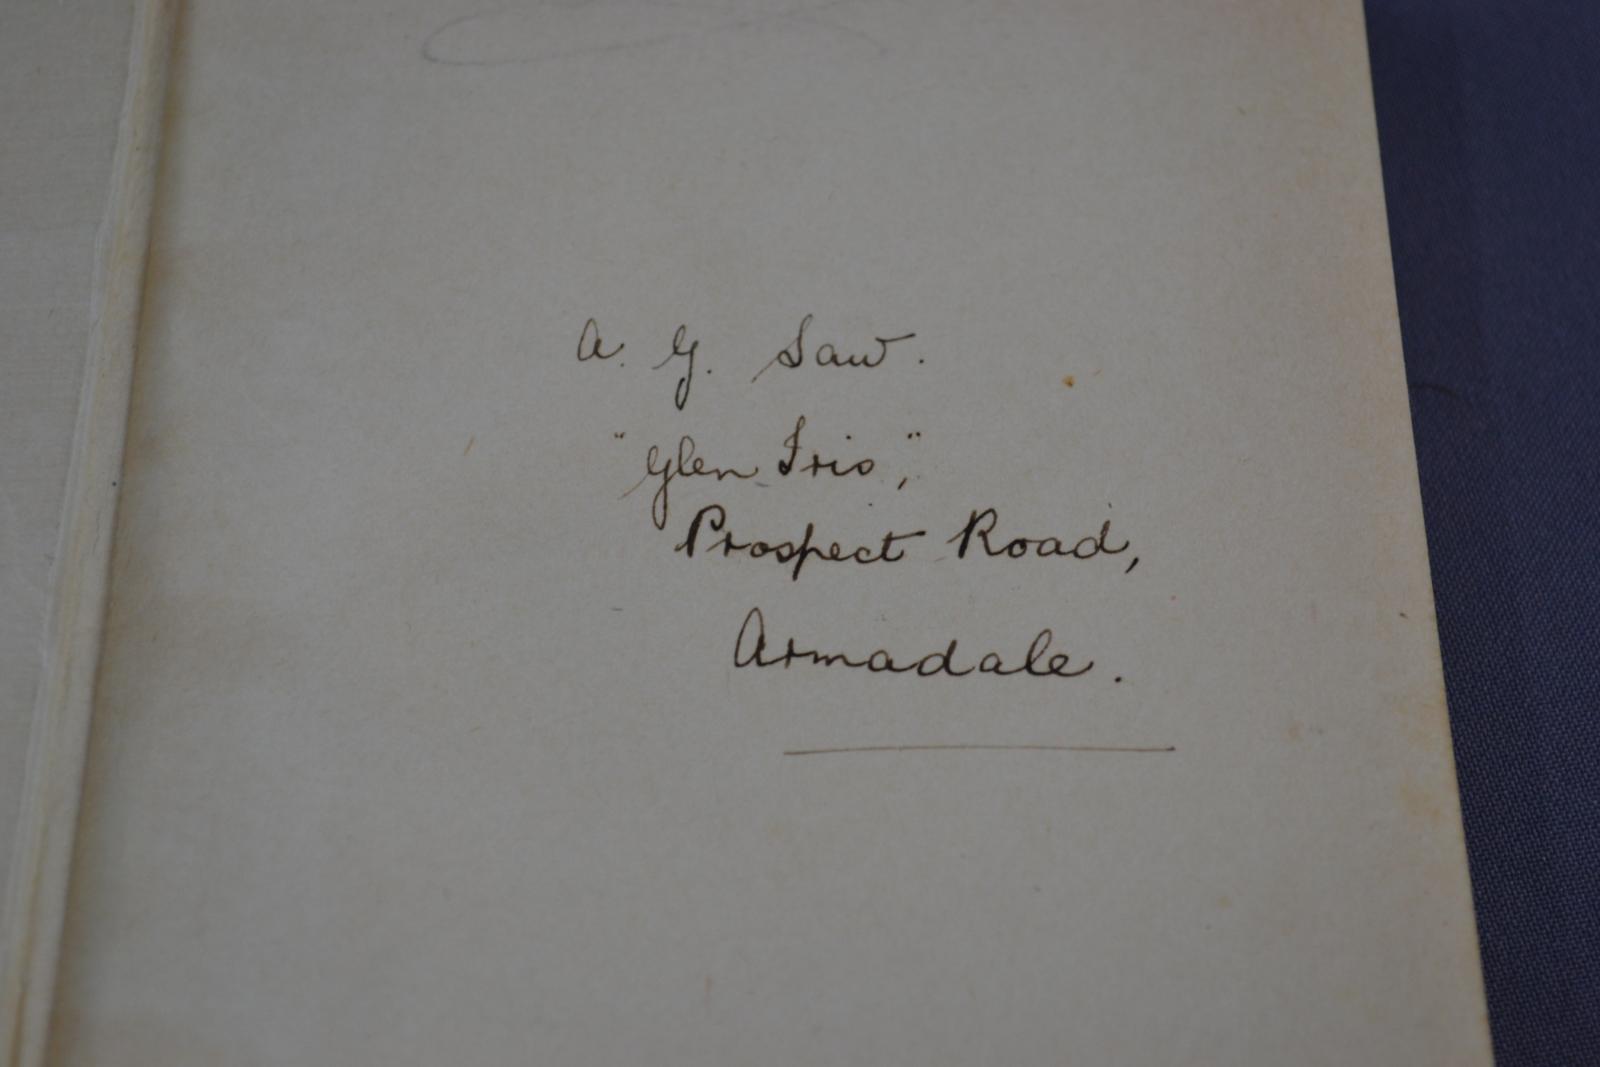 hand written, in pen, inscription on blank inside white page of book. Text "A.G. Saw 'Glen Iris', Prospect Road, Armadale"'